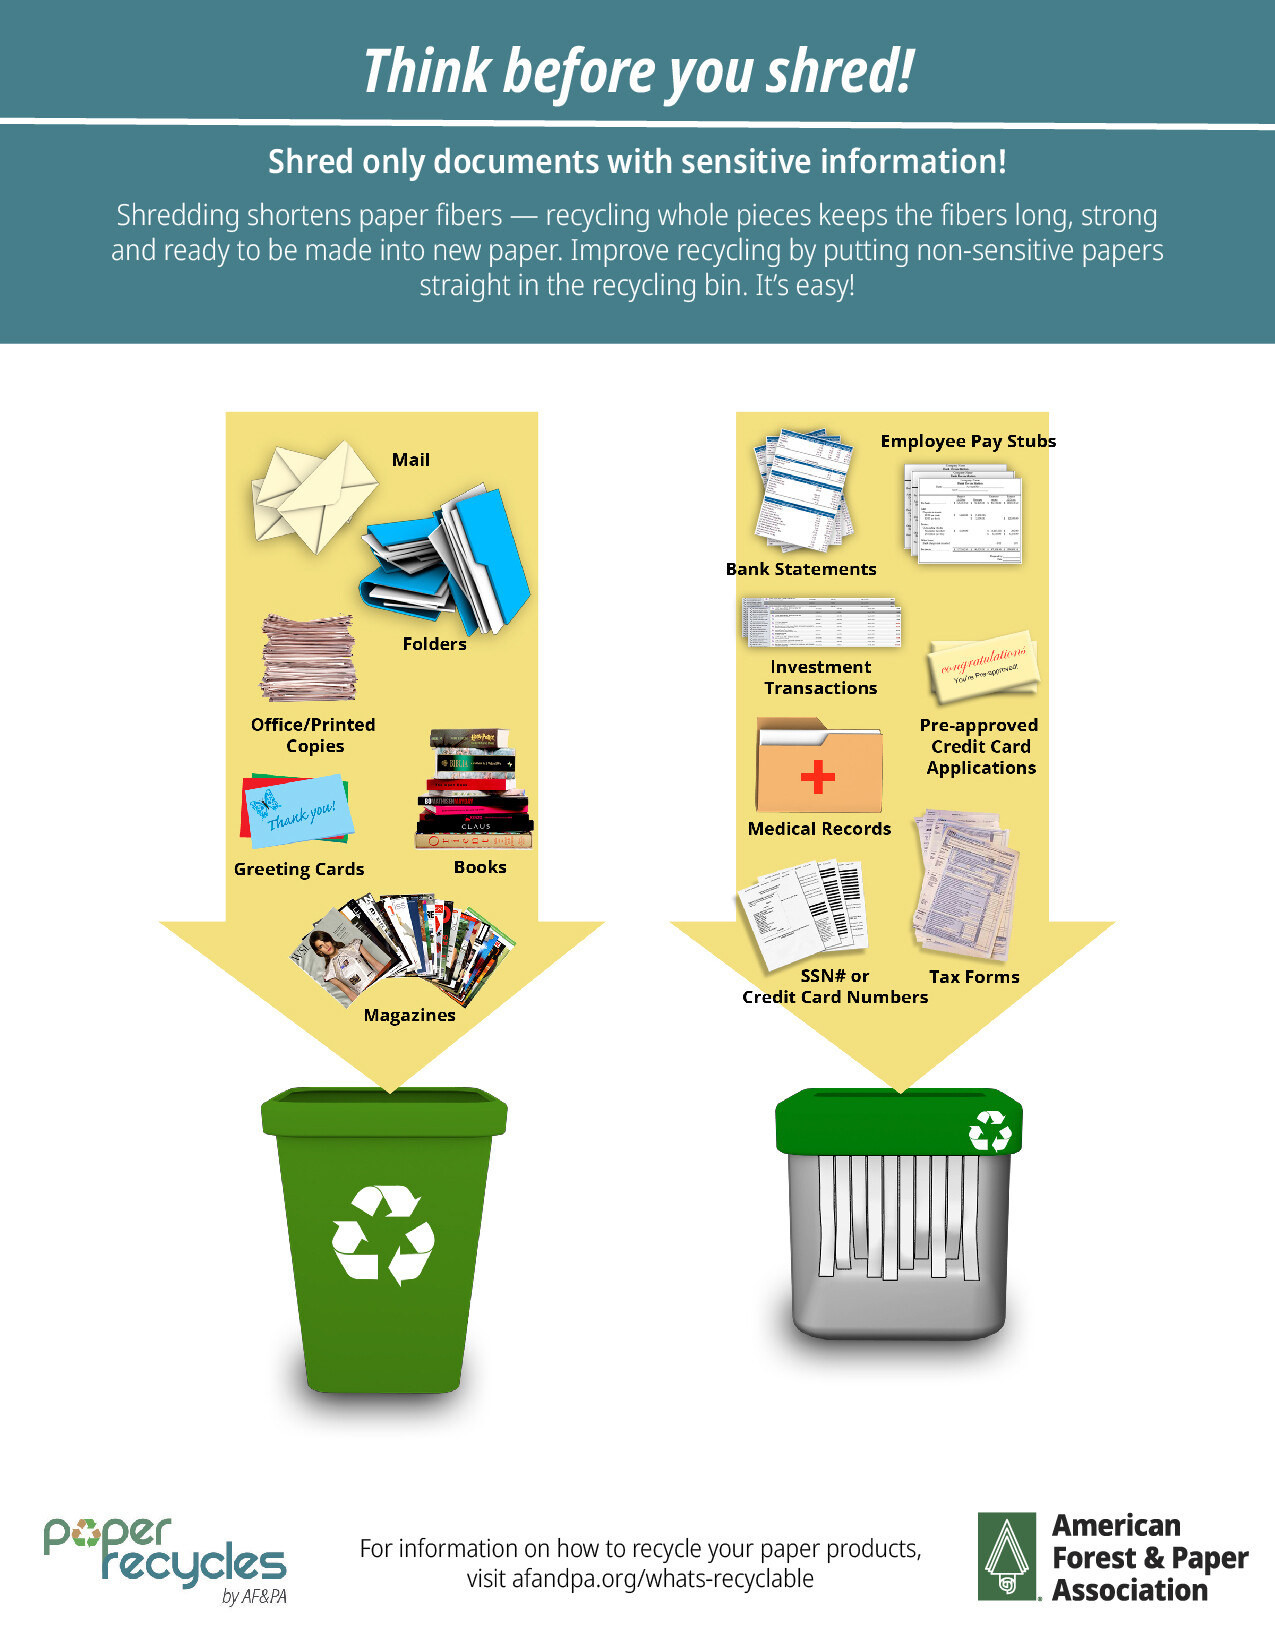 Shredded Paper - Recycle RightRecycle Right